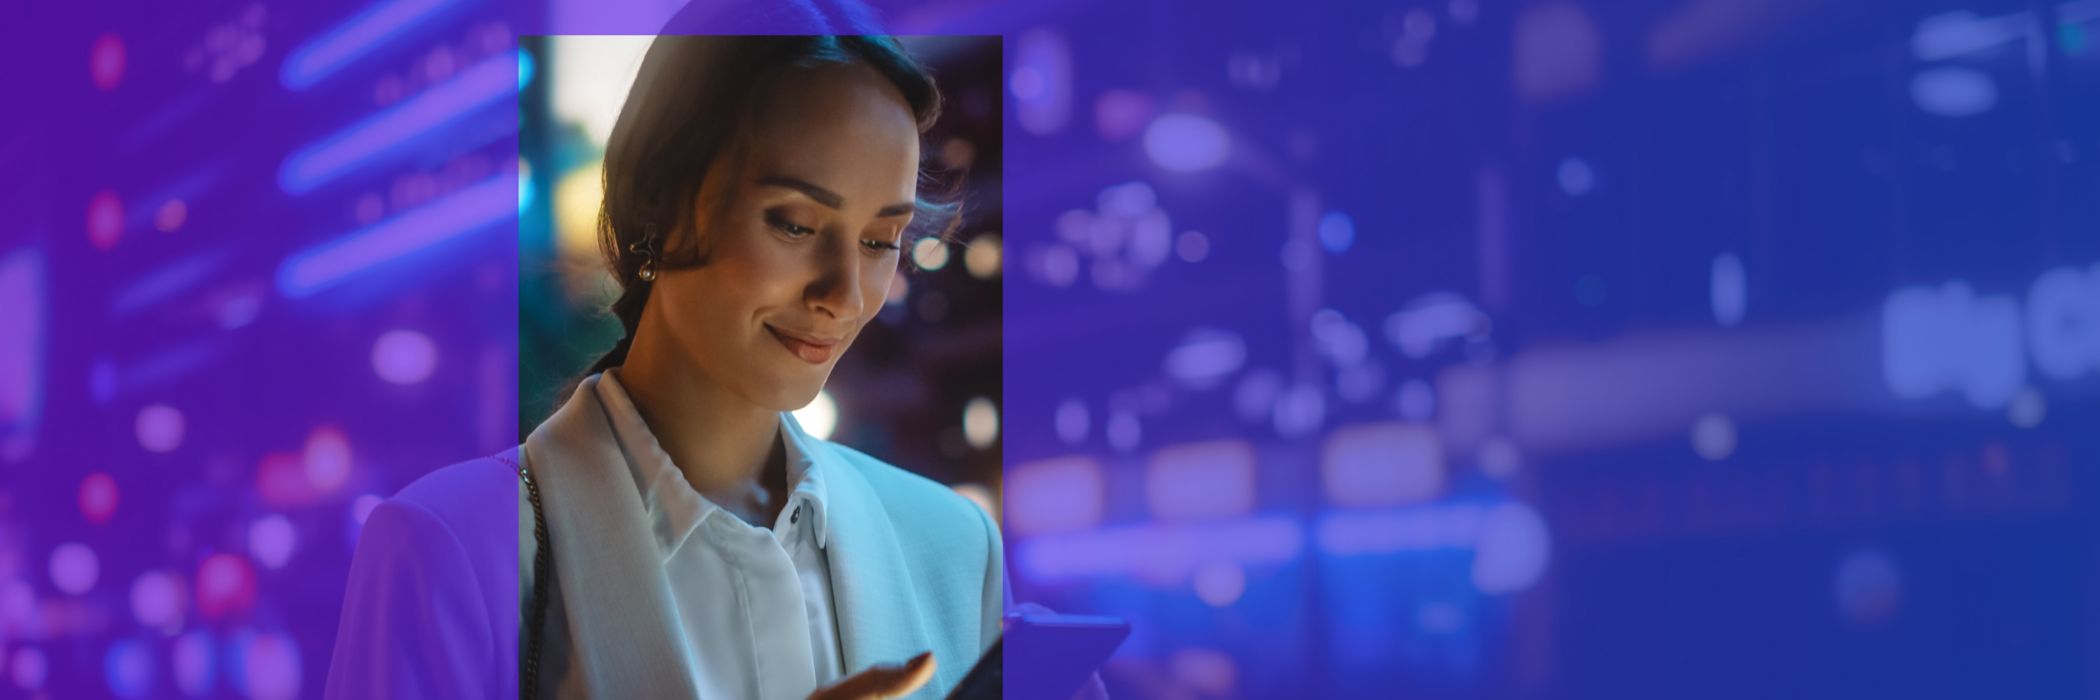 Business woman smiling at phone in the city at night